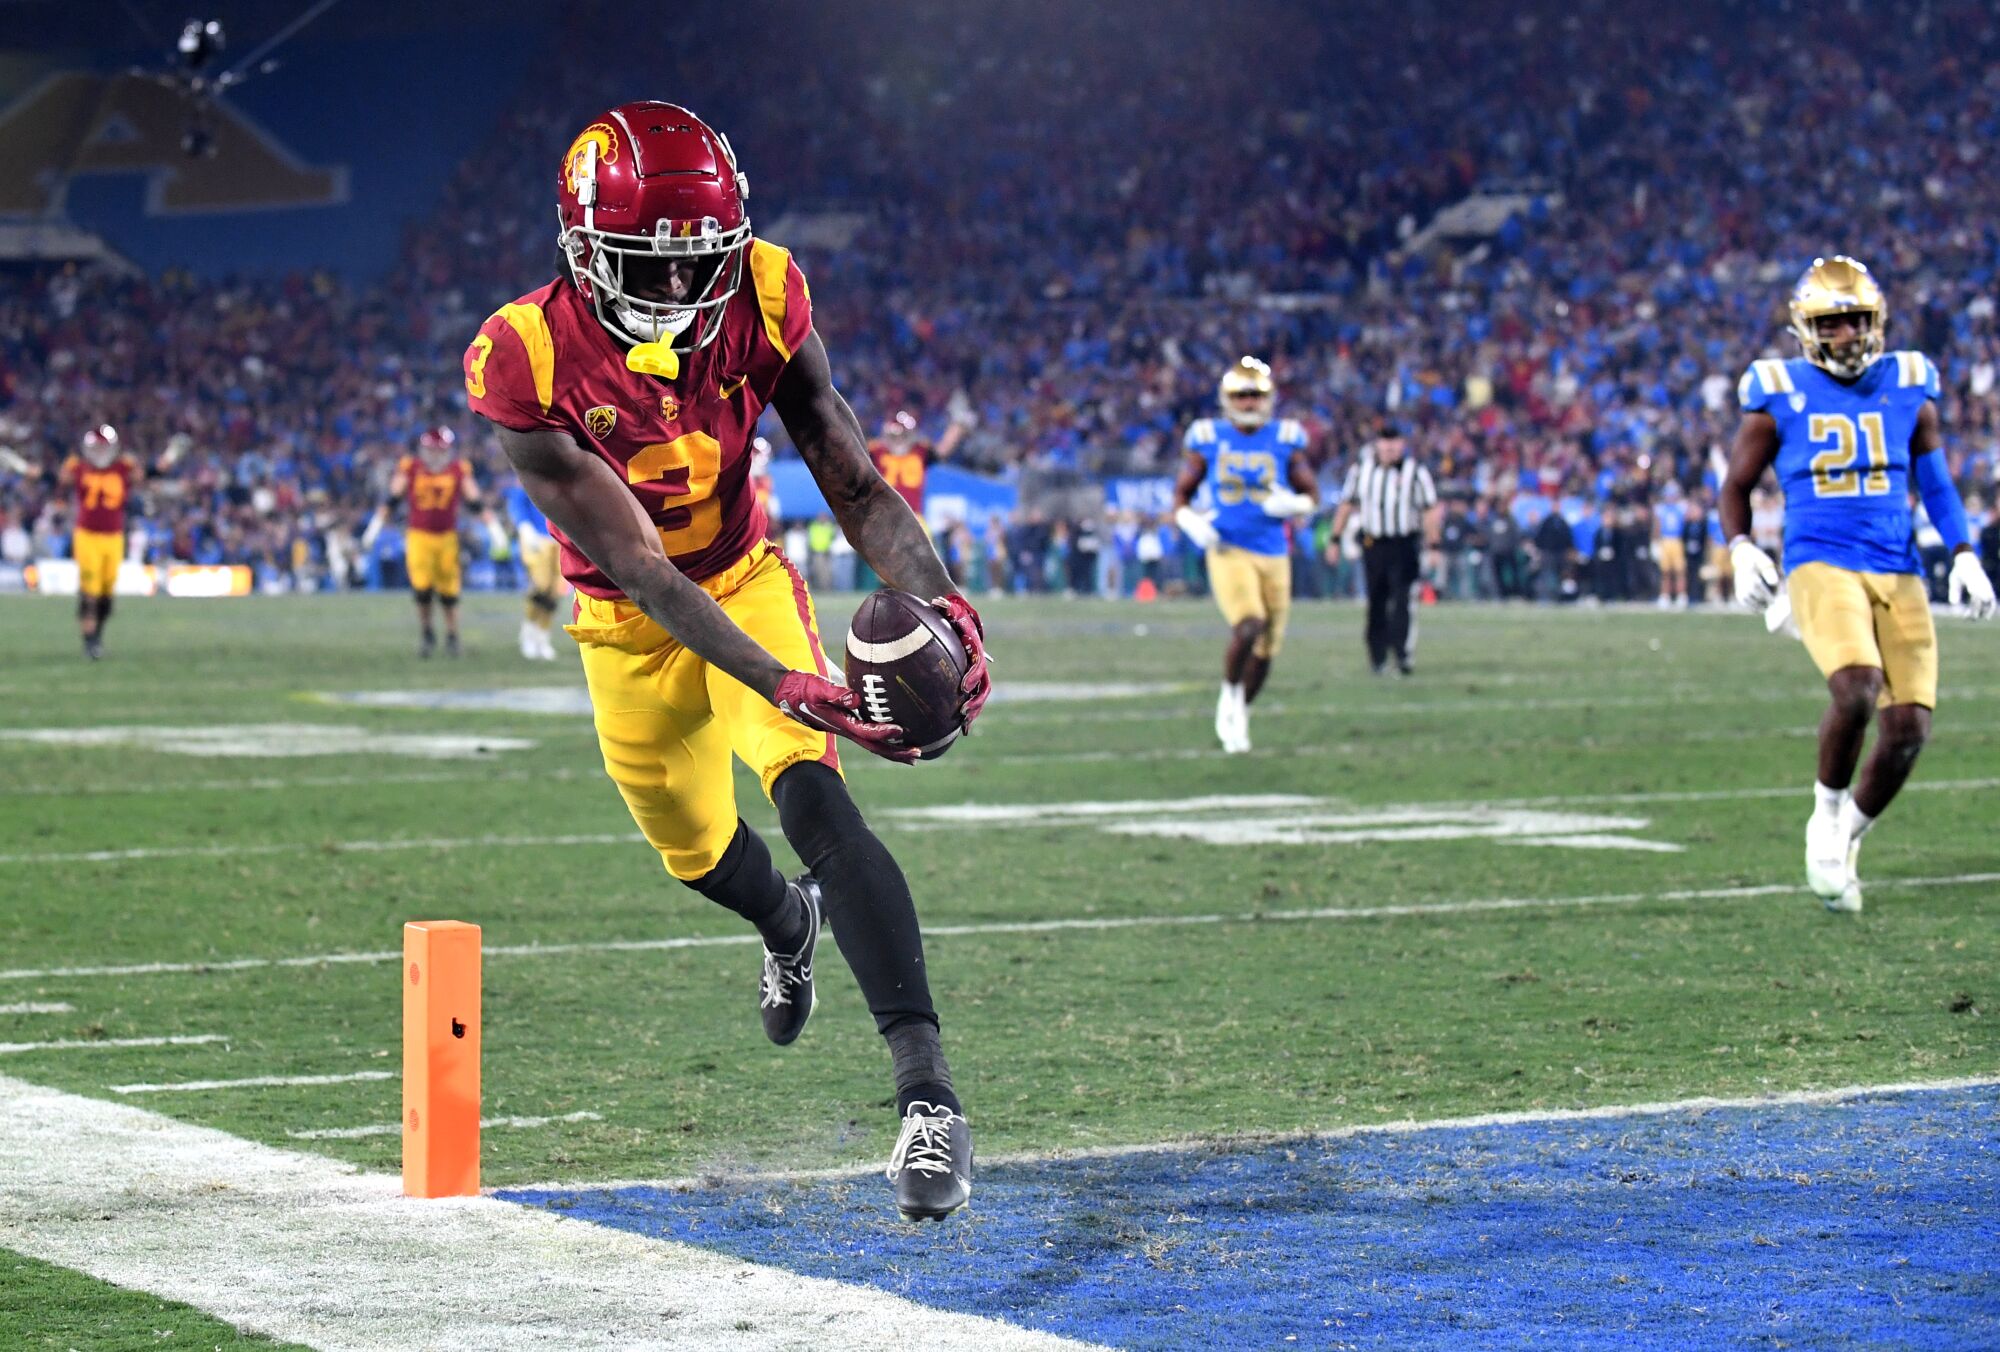 USC wide receiver Jordan Addison catches a touchdown pass against UCLA in the third quarter Saturday.